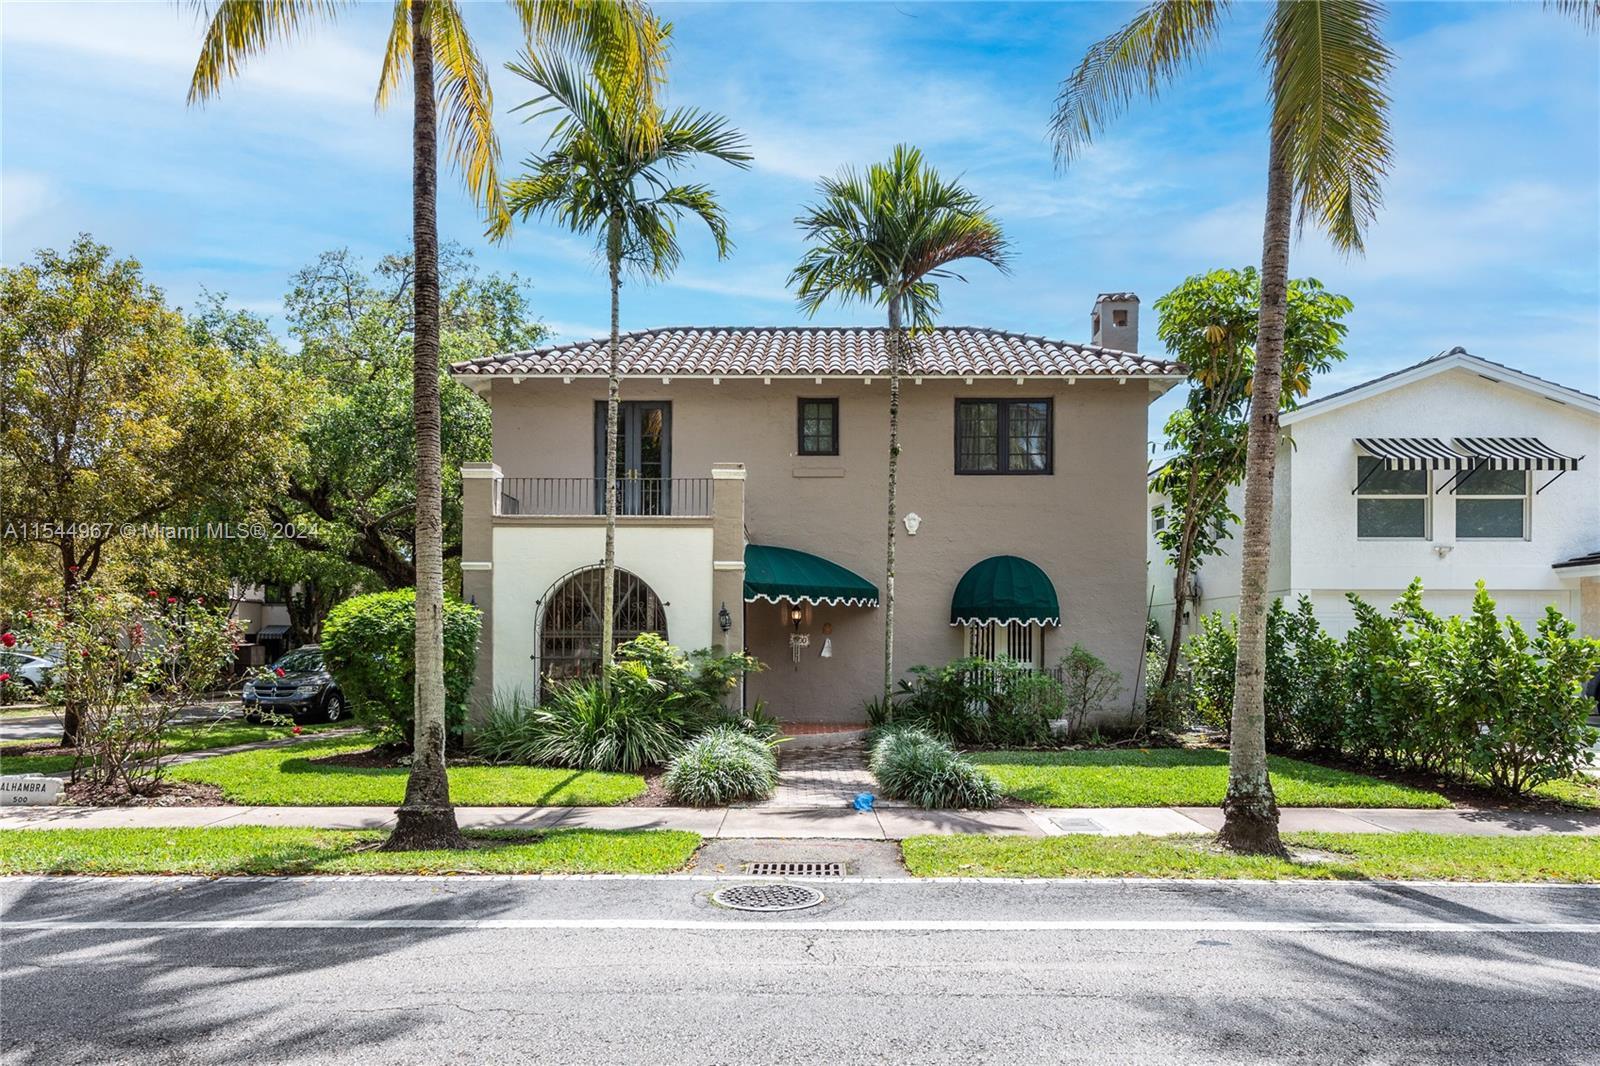 This 1927 home is a Mediterranean Revival home with approx. 2,500 adj. sq. ft. You enter a foyer tha